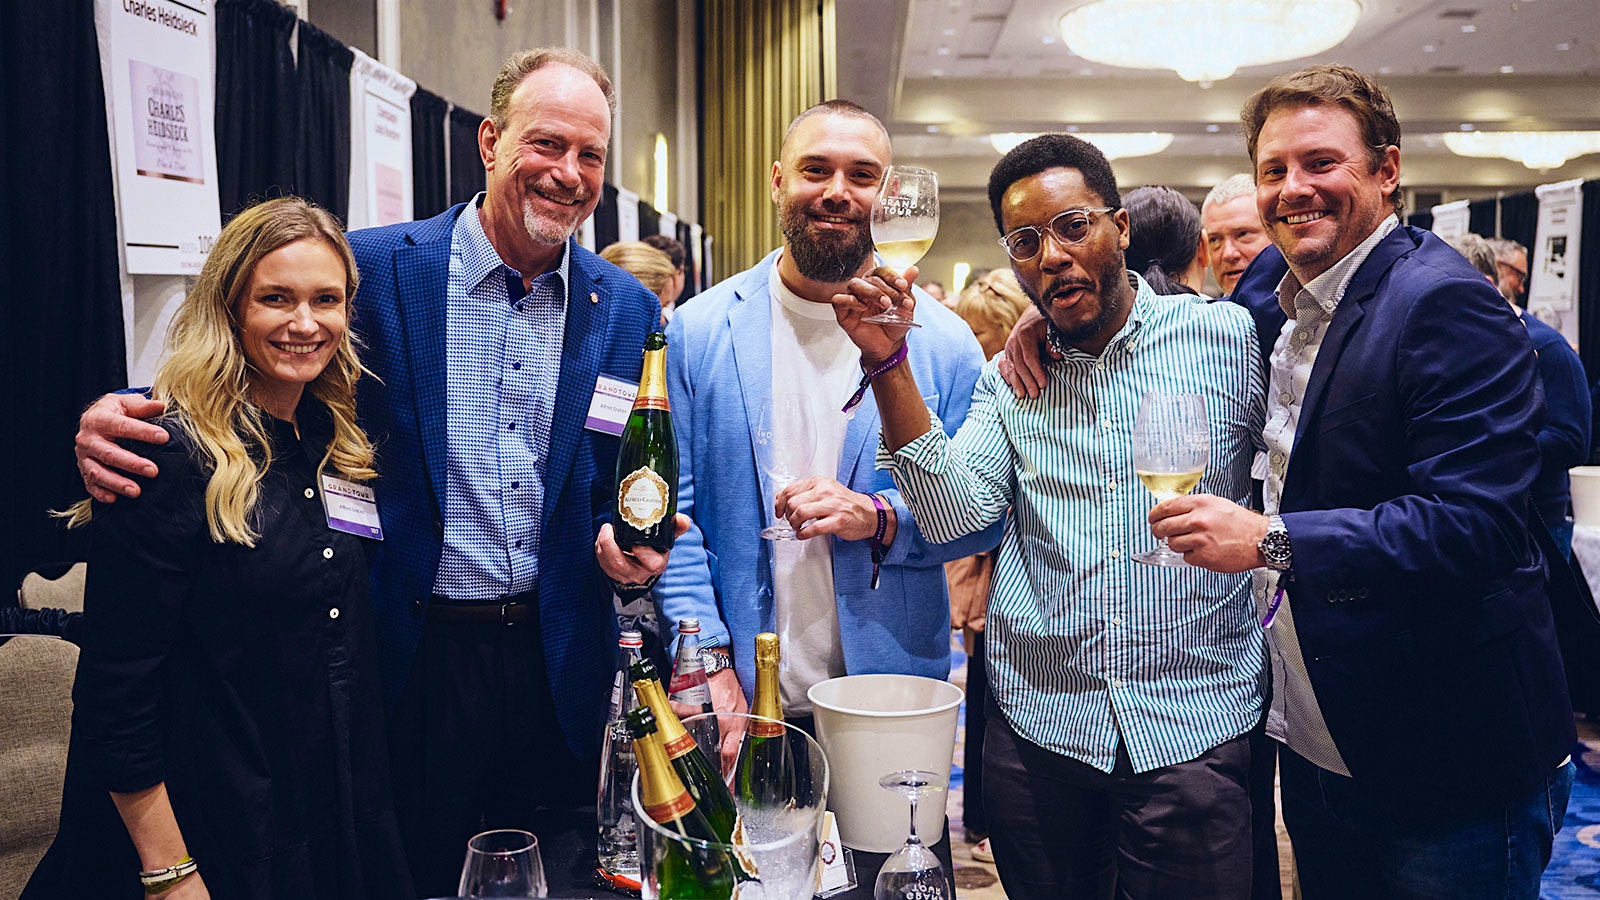  Katie German, Roger Ross, Kevin Hyde, Jacque Louie, Nate Fuller share a toast at the Wine Spectator Grand Tour in New Orleans.